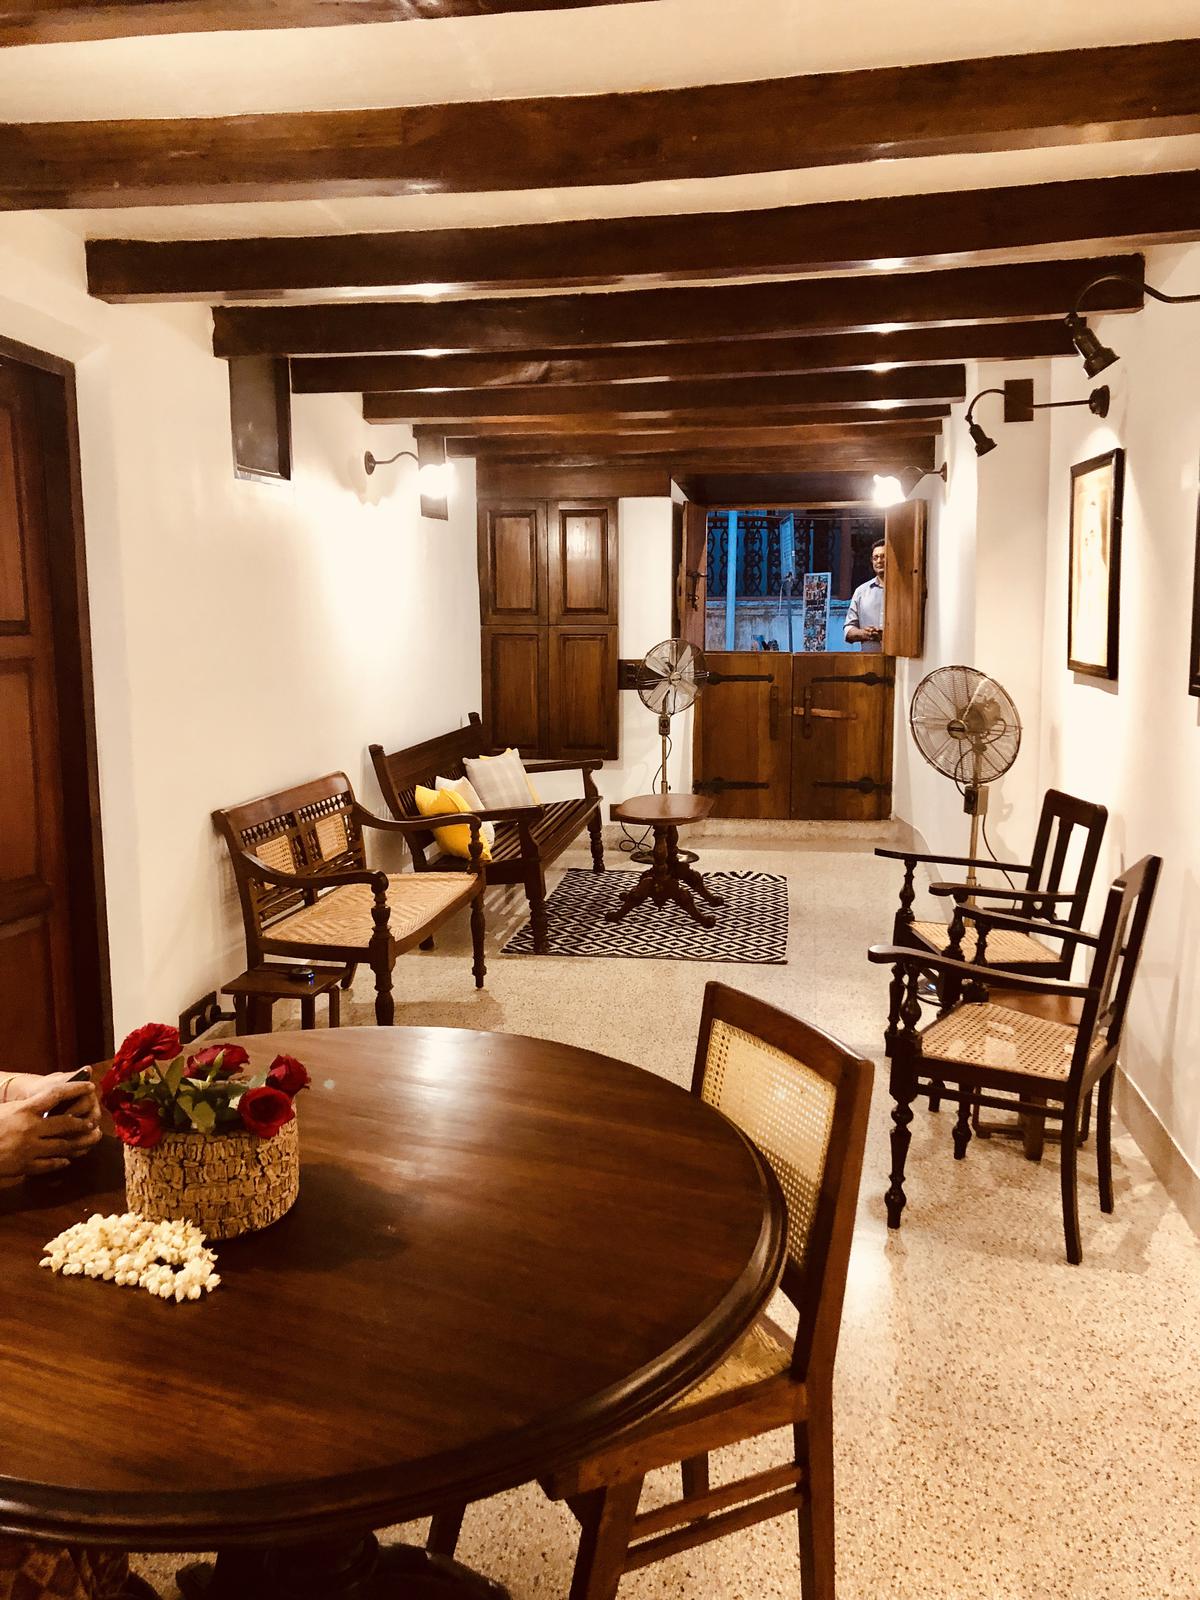 Newly renovated and furnished AB Salem House at Synagogue Lane, Mattancherry